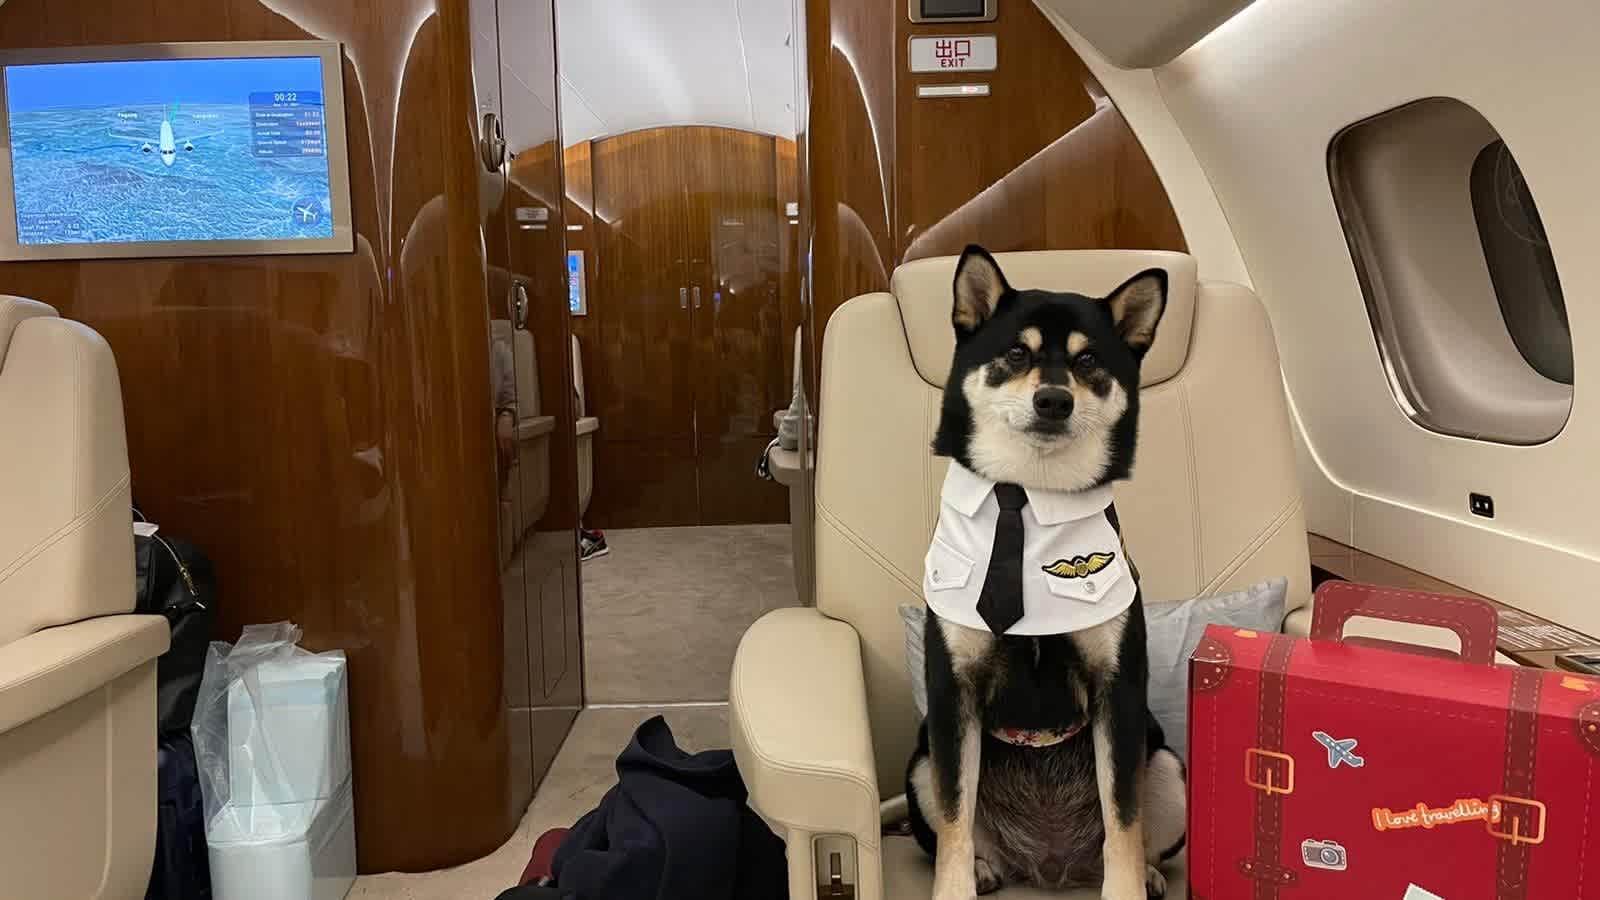 Departing Hong Kong residents turn to private jets to get pets out of city